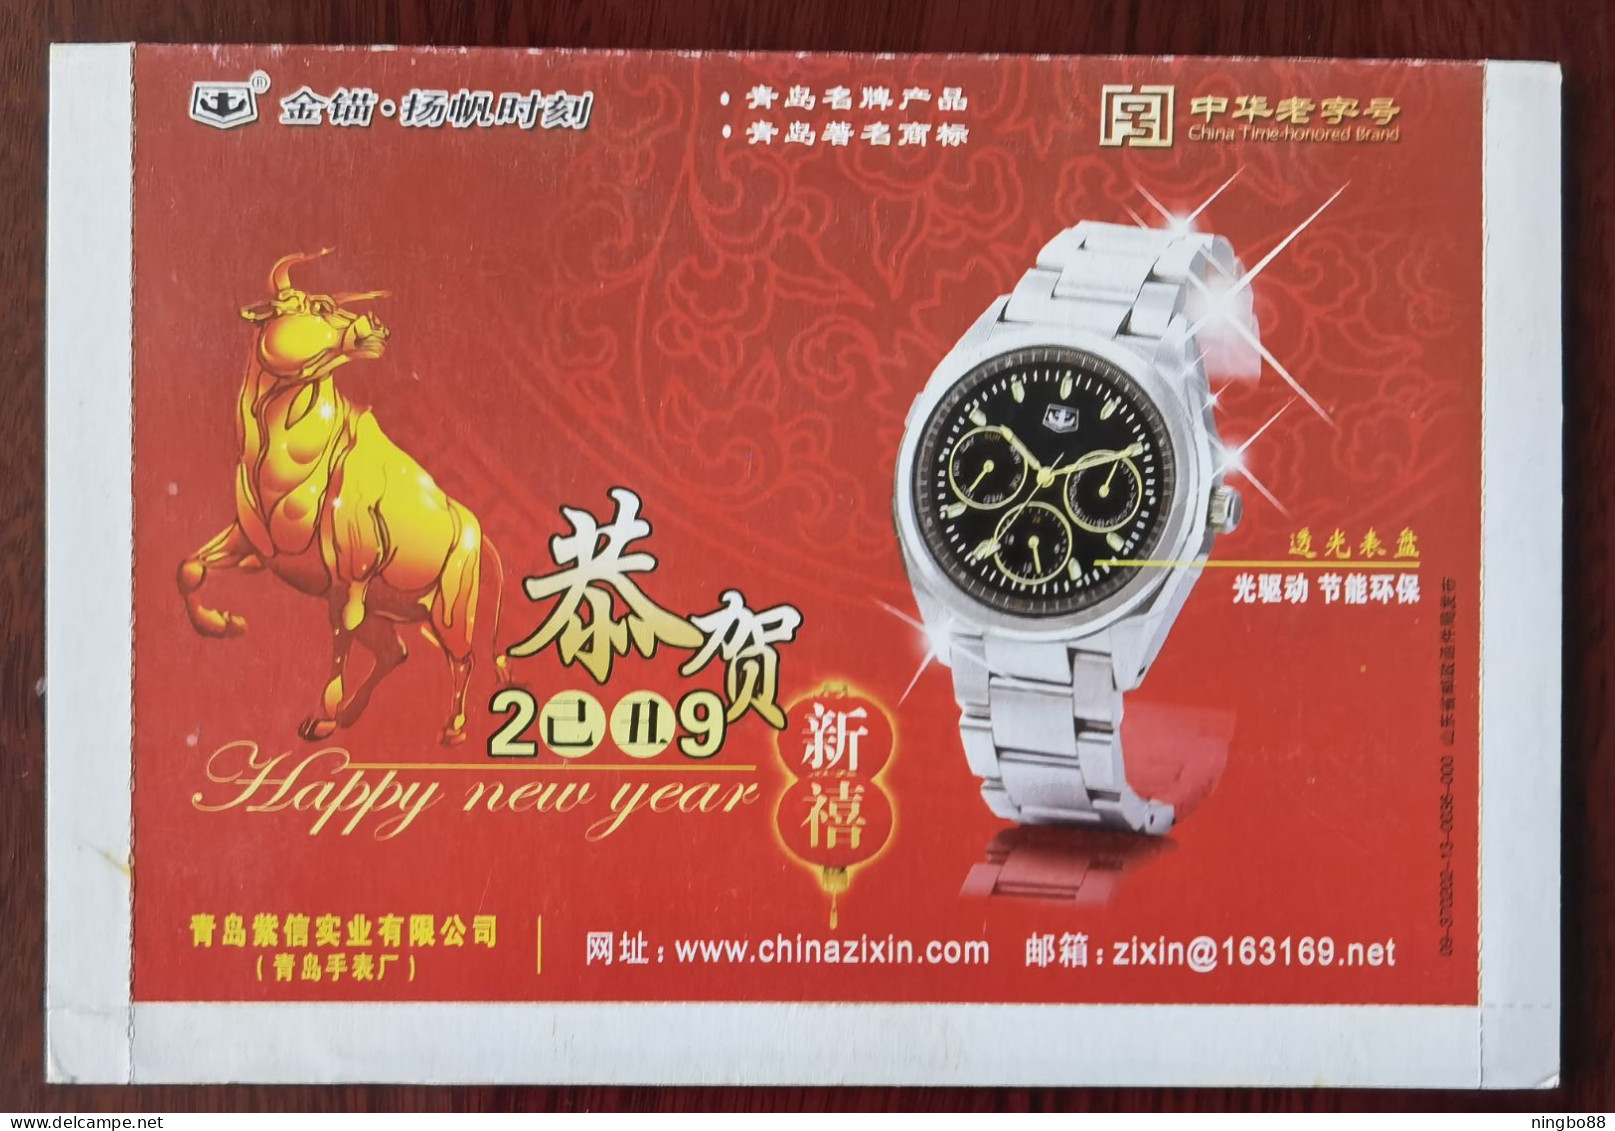 China Time-honored Brand Golden Anchor Photokinetic Energy Watch,China 2009 Qingdao Watch Factory Advertising PSL - Horloges